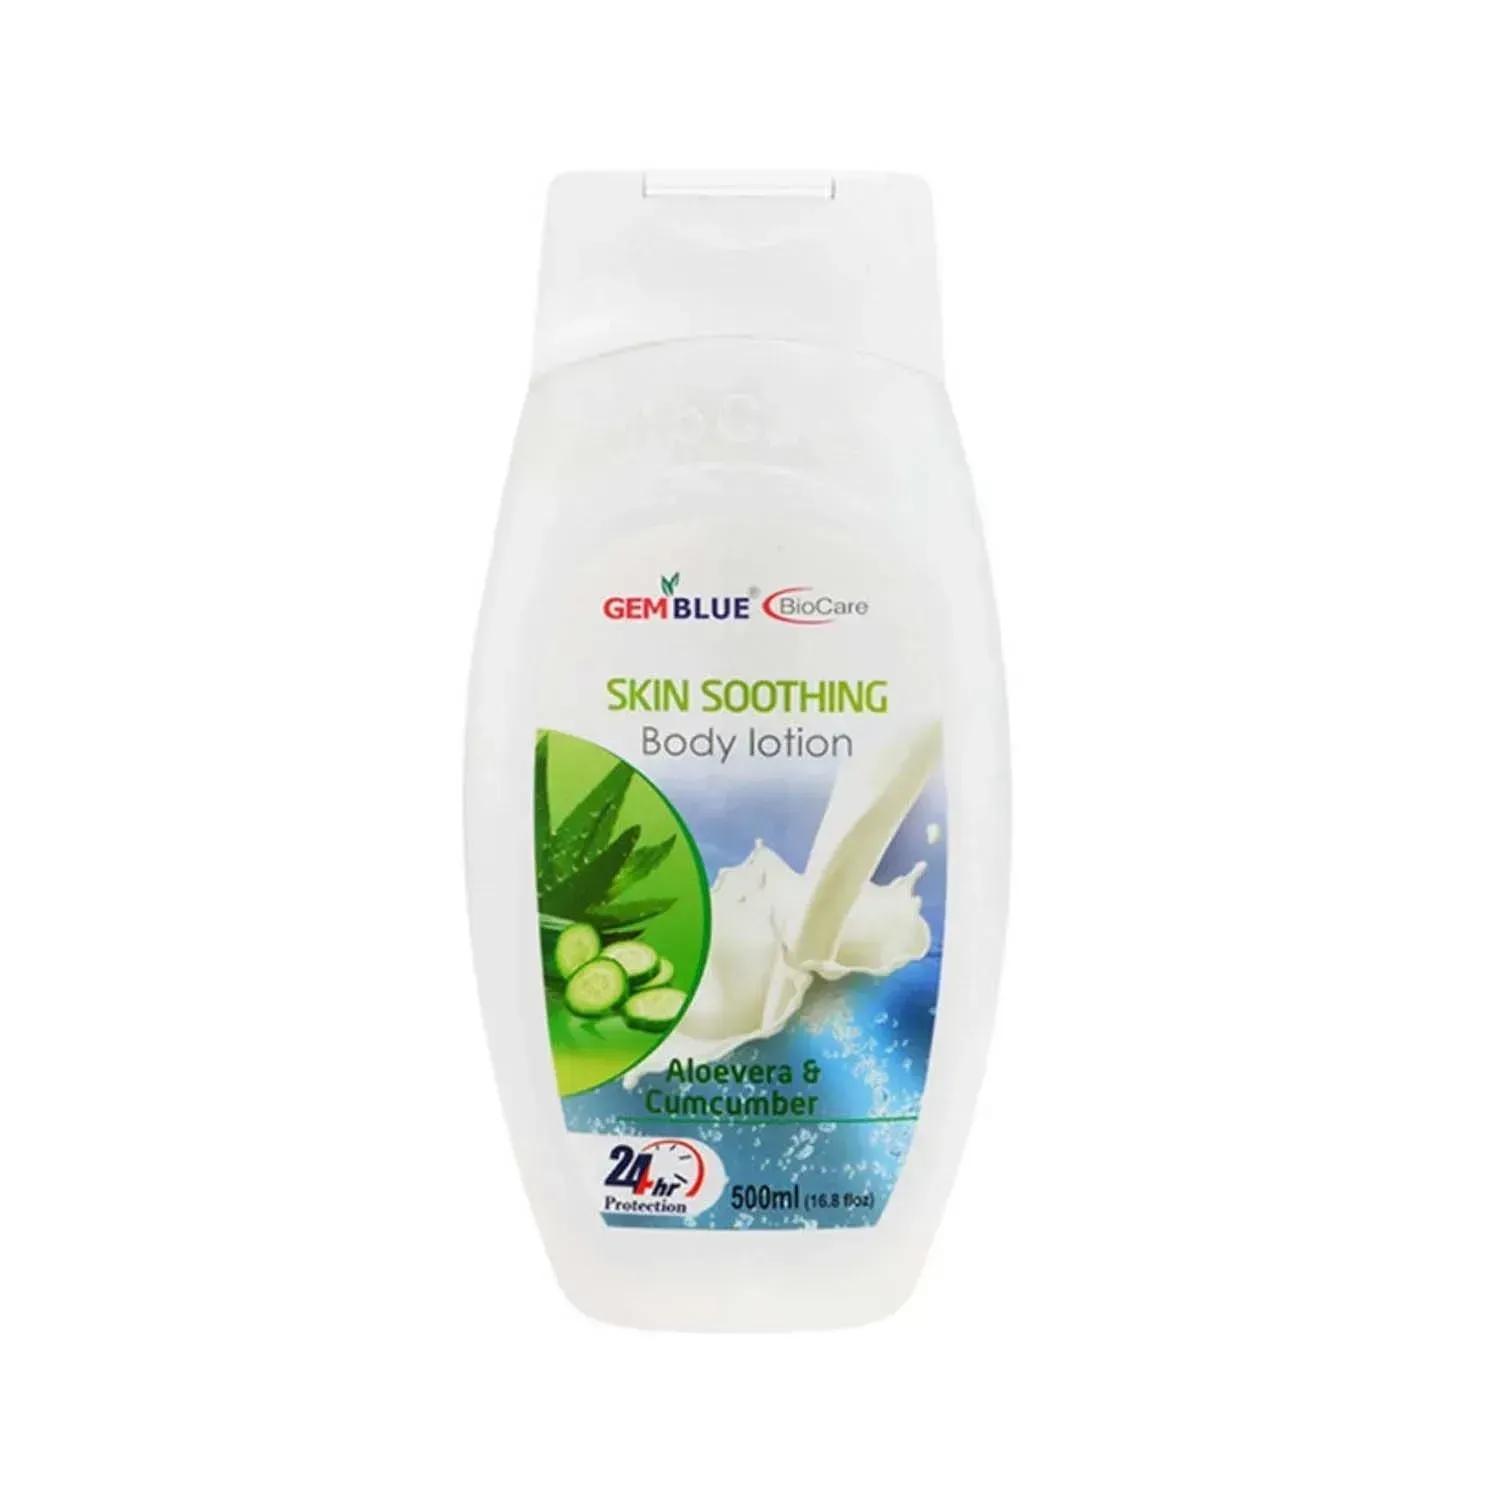 Gemblue Biocare Skin Soothing Body Lotion - (500ml)